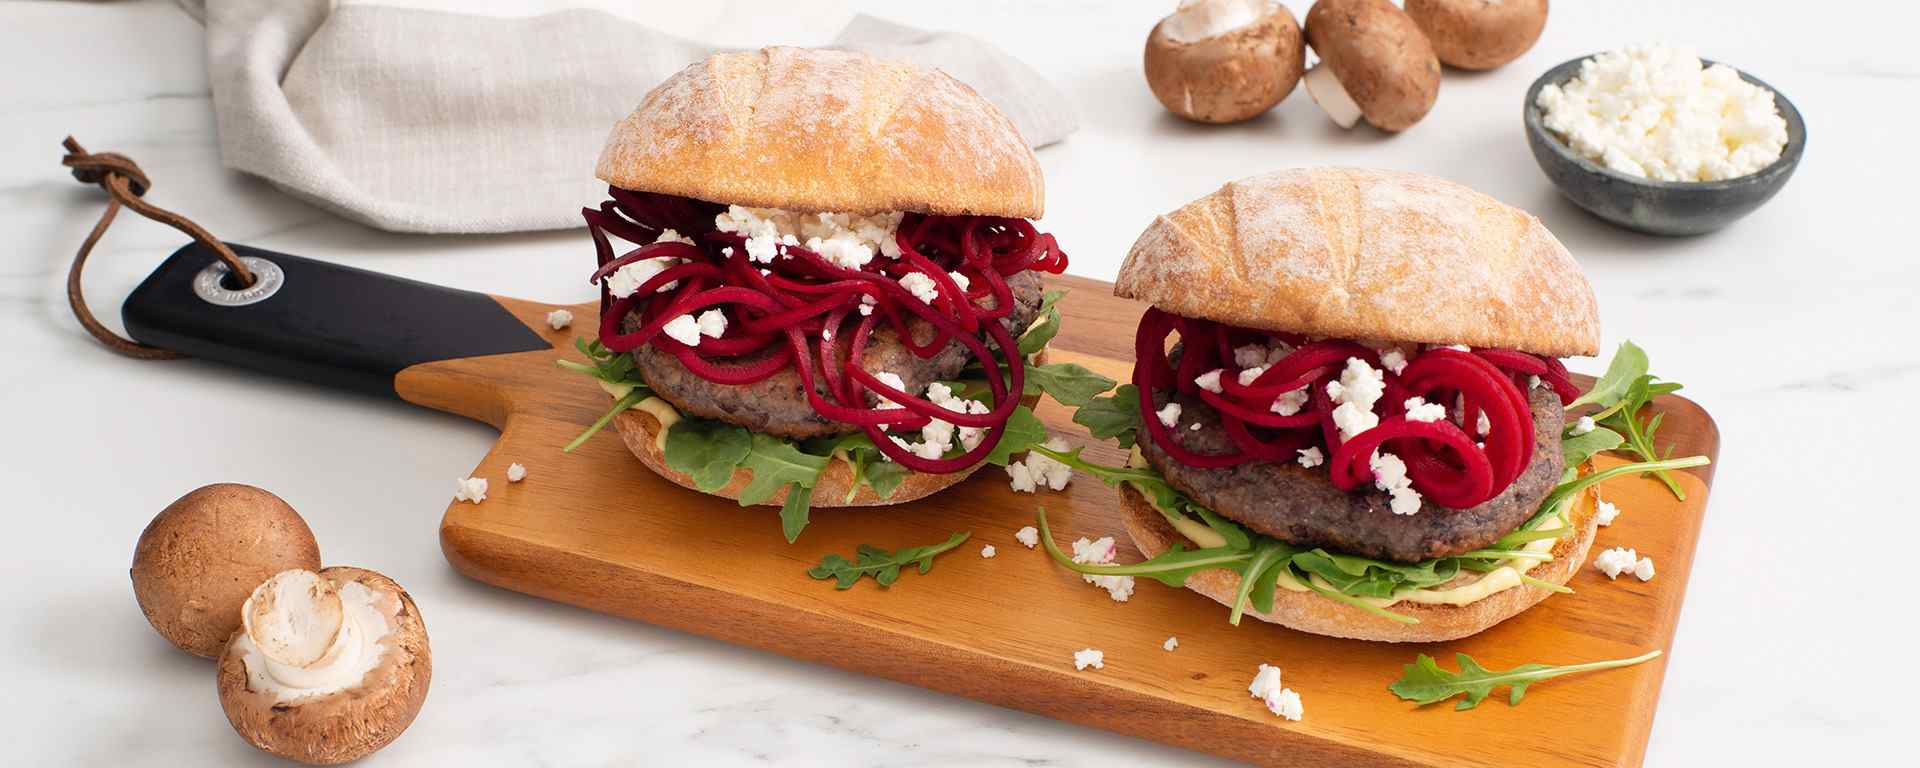 Photo of - Mushroom and Black Bean Burger with Goat Cheese